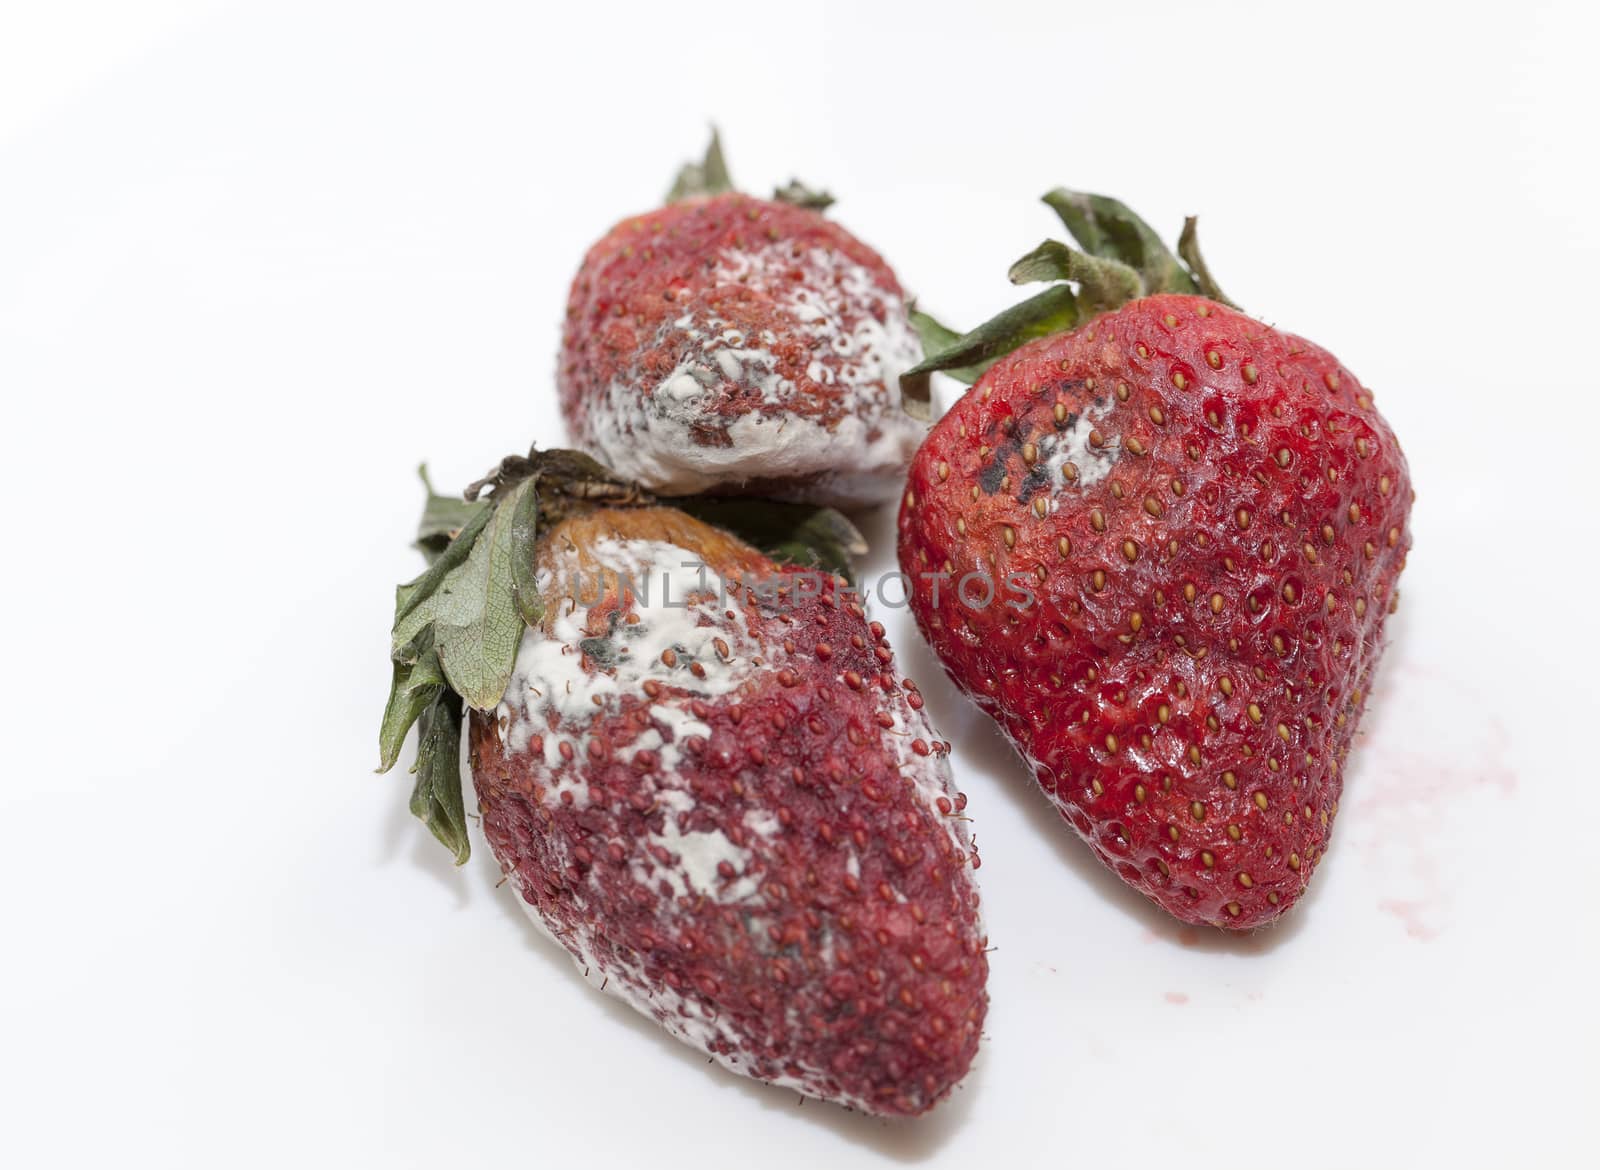 Strawberry with mold by avq